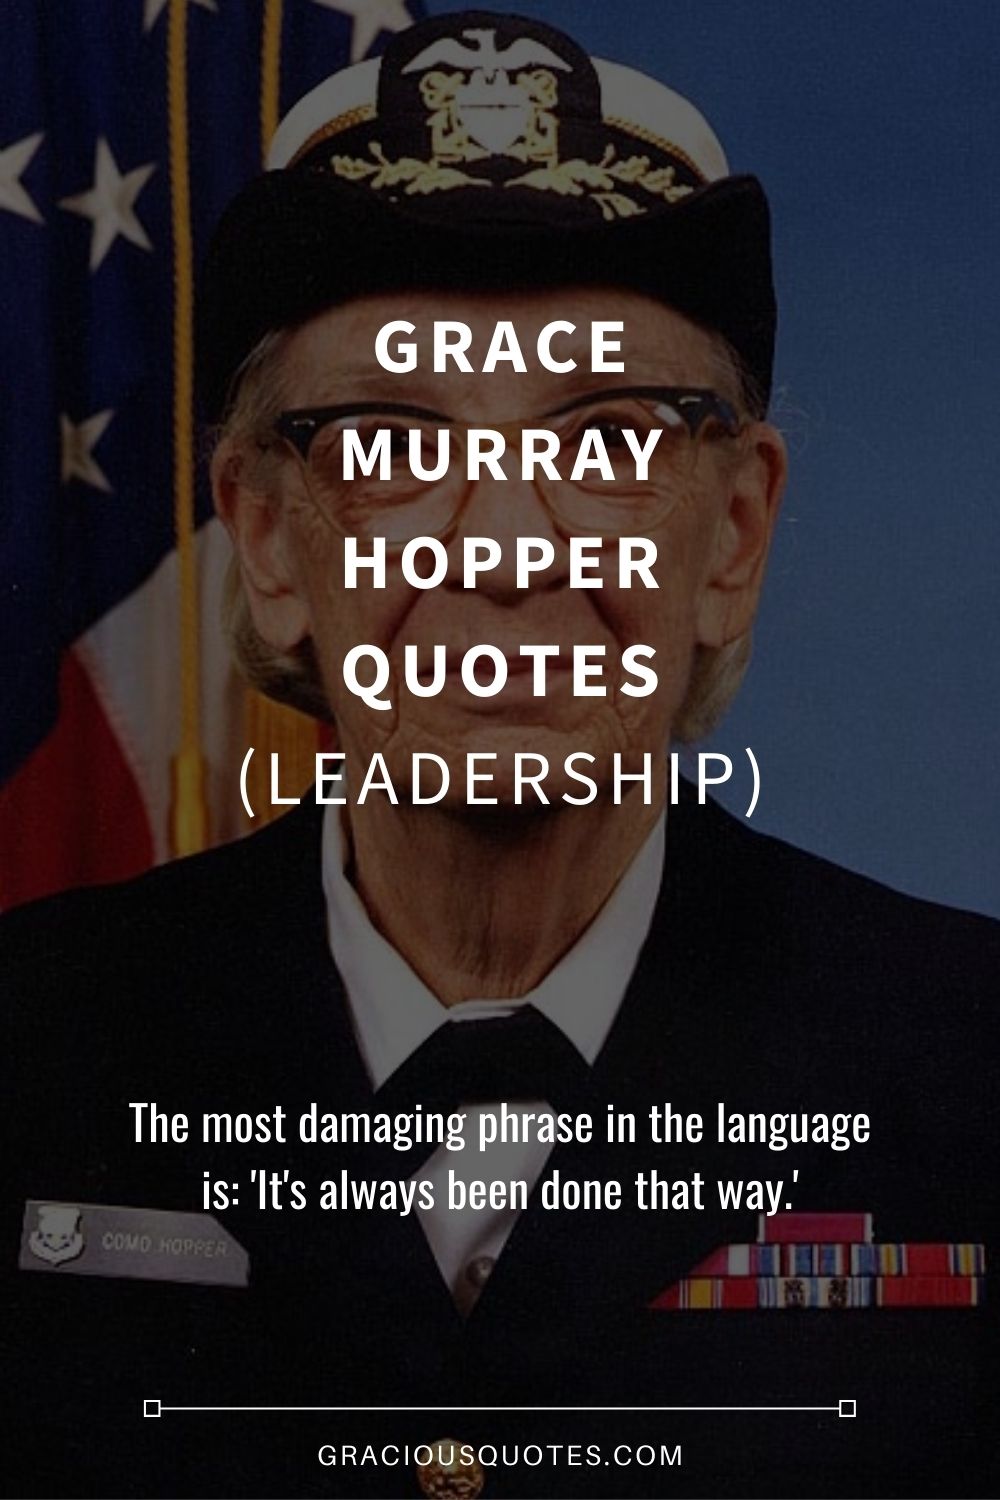 Grace Murray Hopper Quotes (LEADERSHIP) - Gracious Quotes